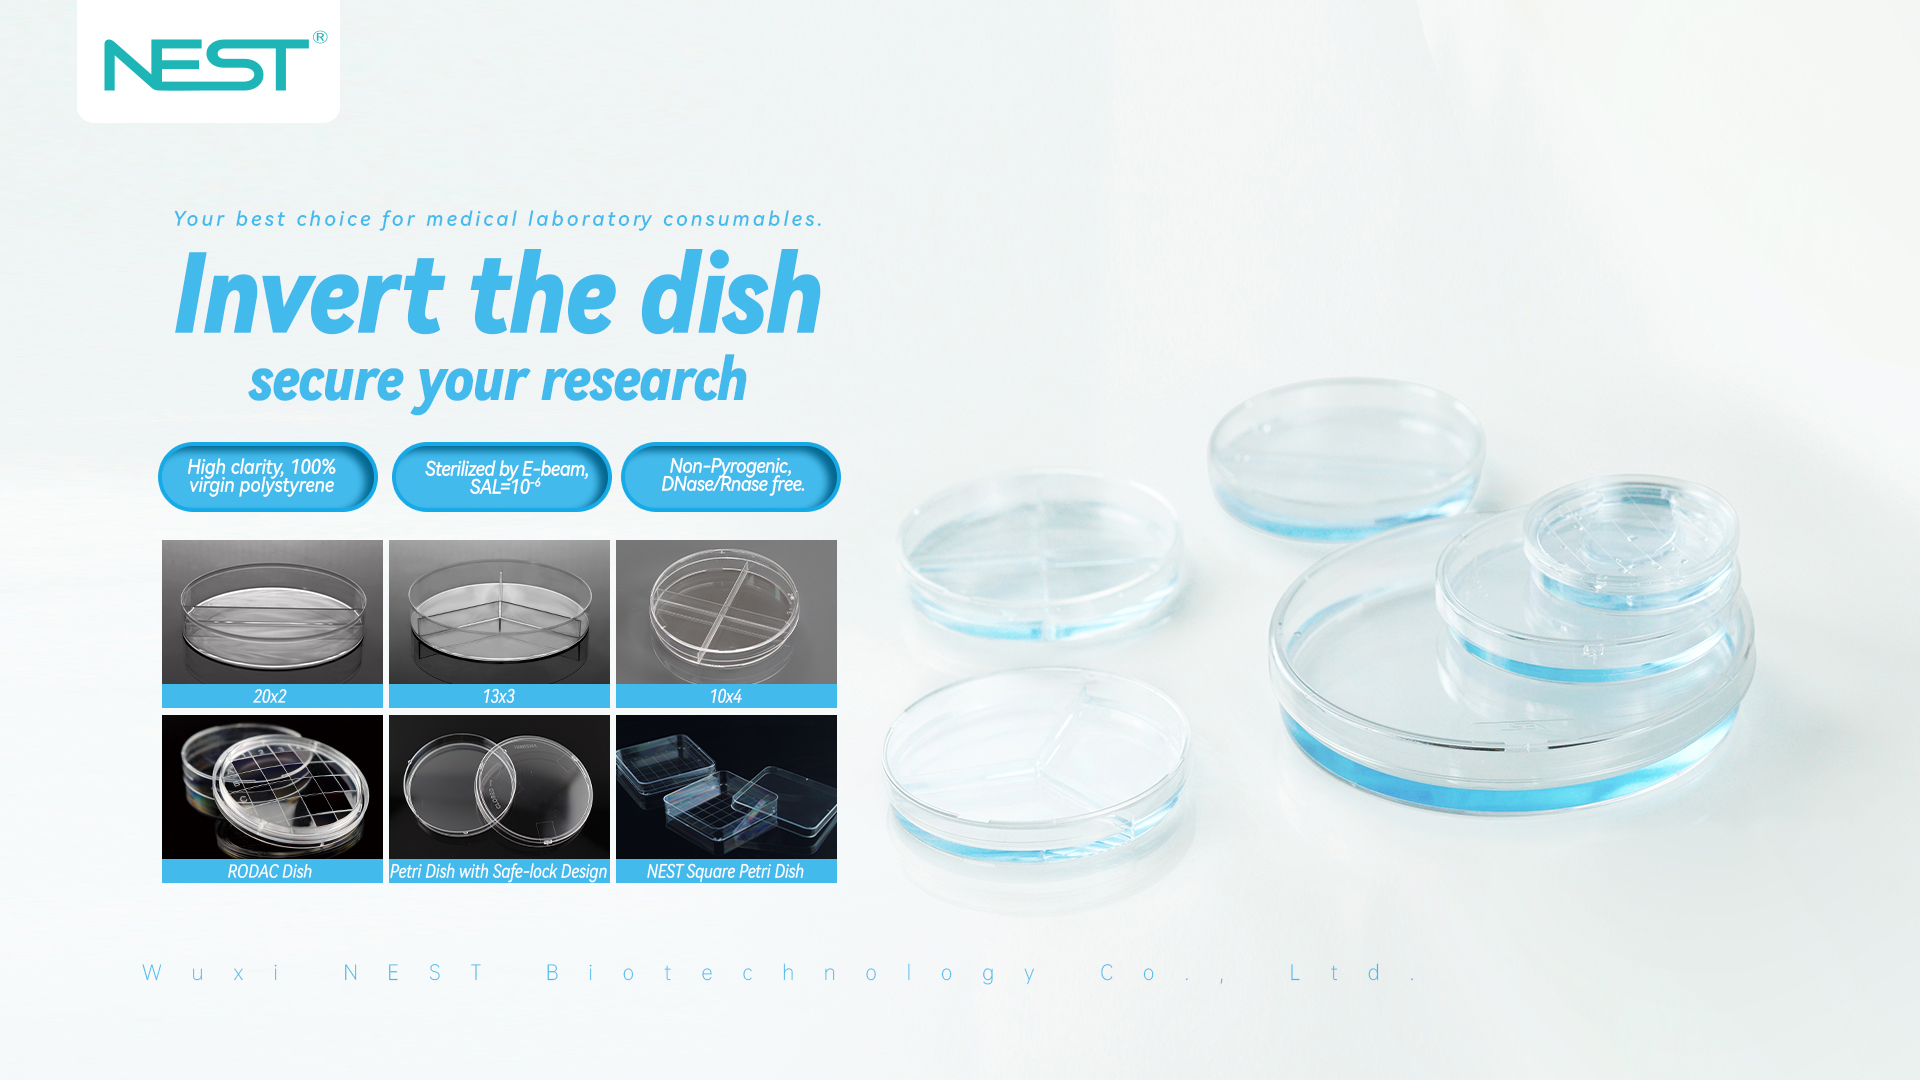 Why are petri dishes inverted during culturing？